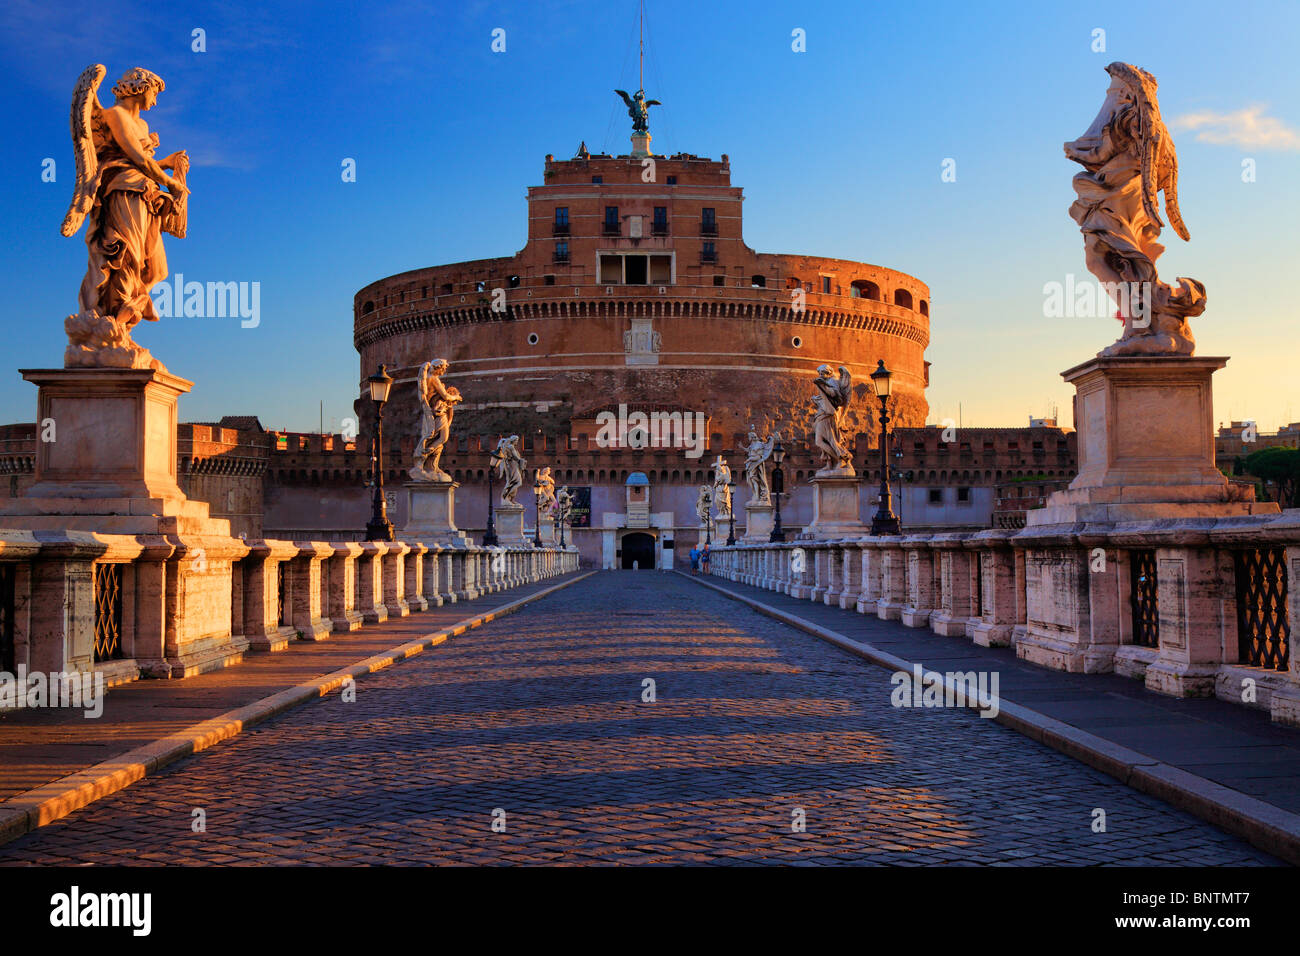 The Mausoleum of Hadrian, usually known as the Castel Sant'Angelo, in Rome, Italy Stock Photo